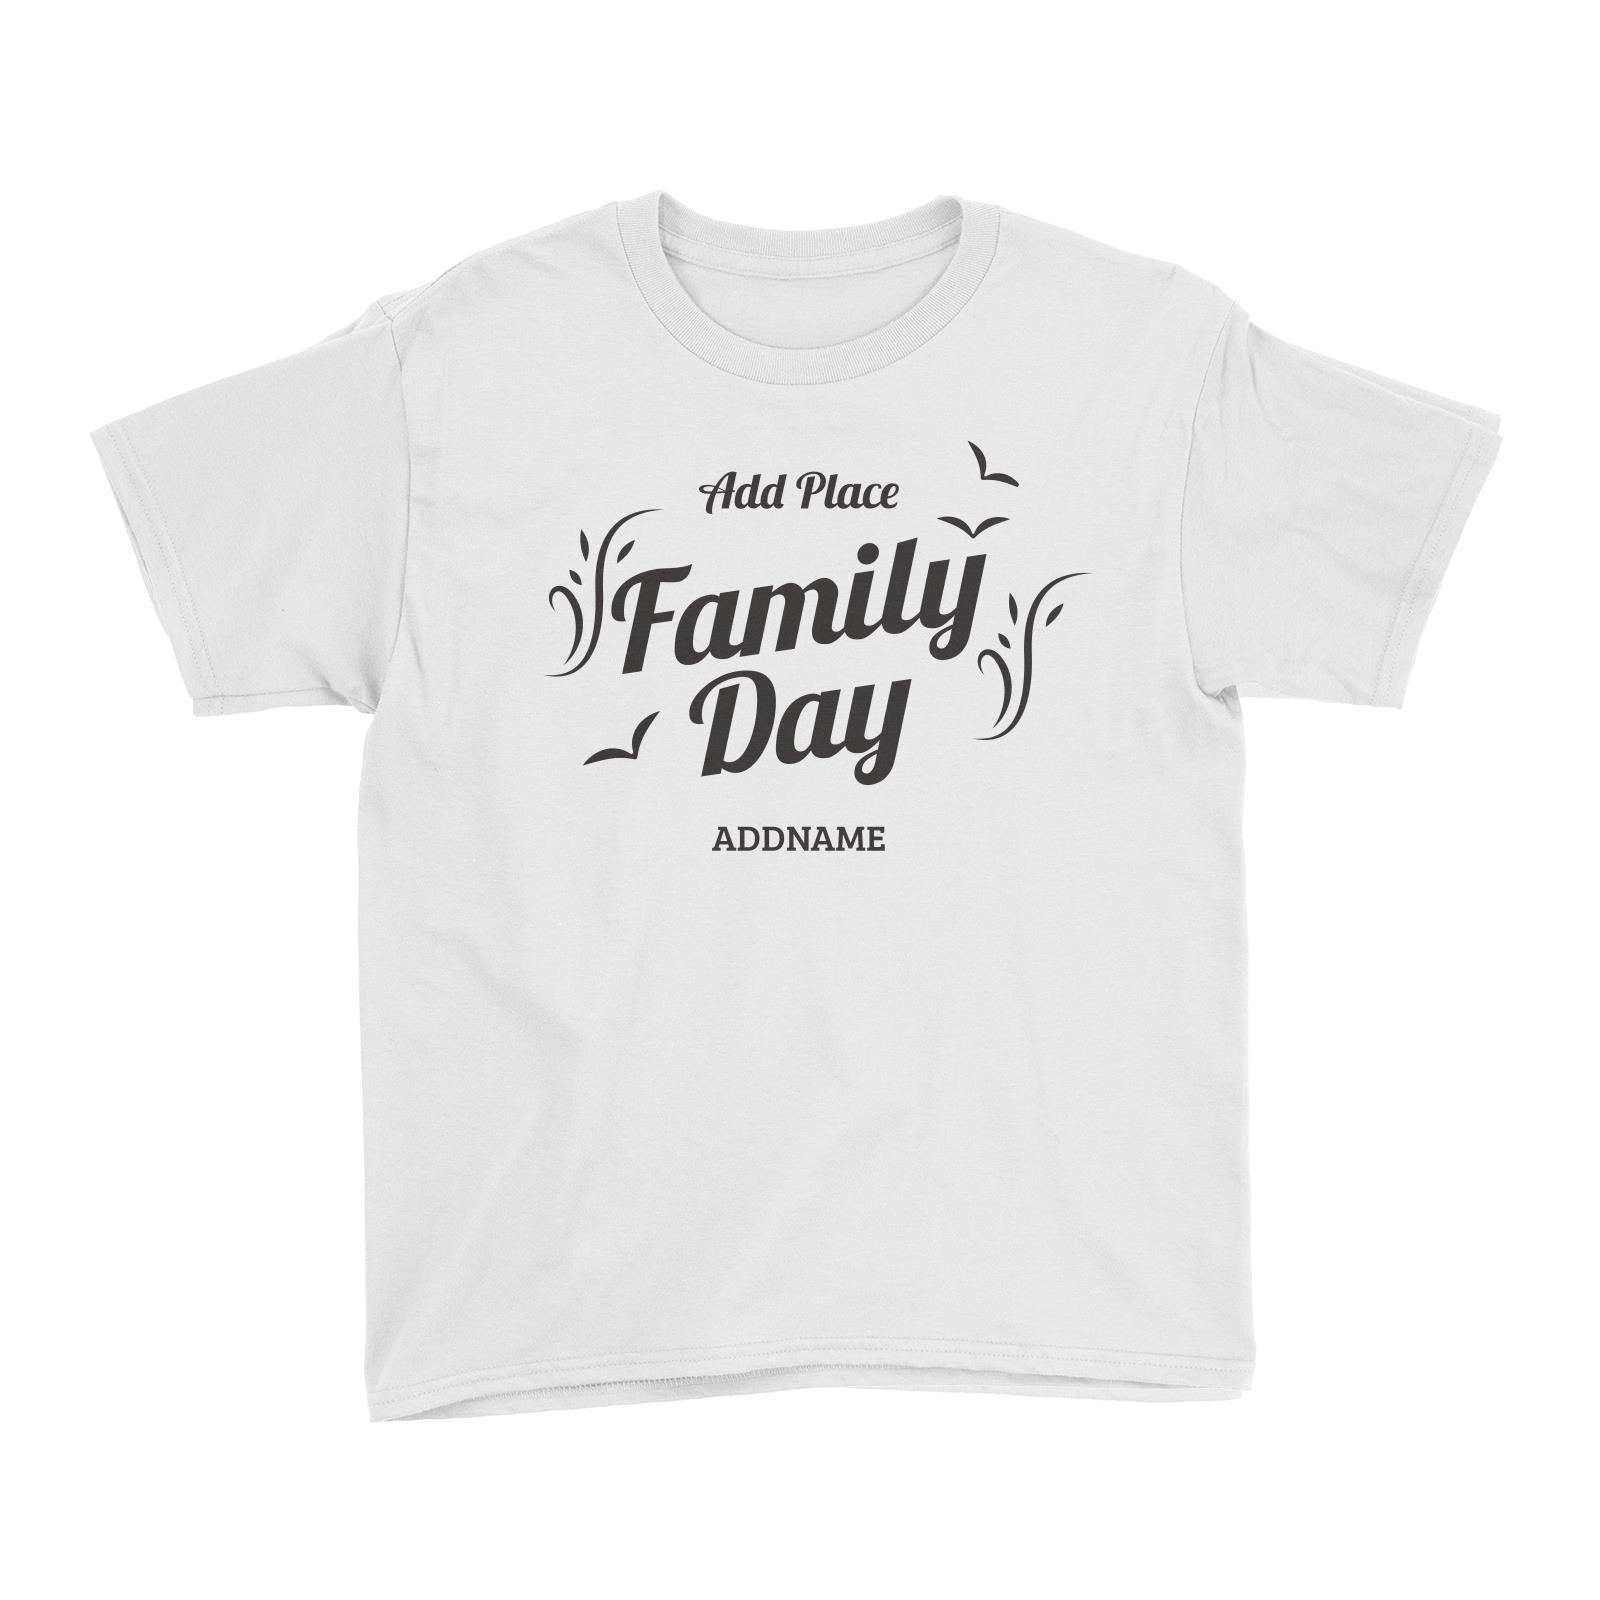 Family Day Flight Birds Icon Family Day Addname And Add Place Kid T-Shirt